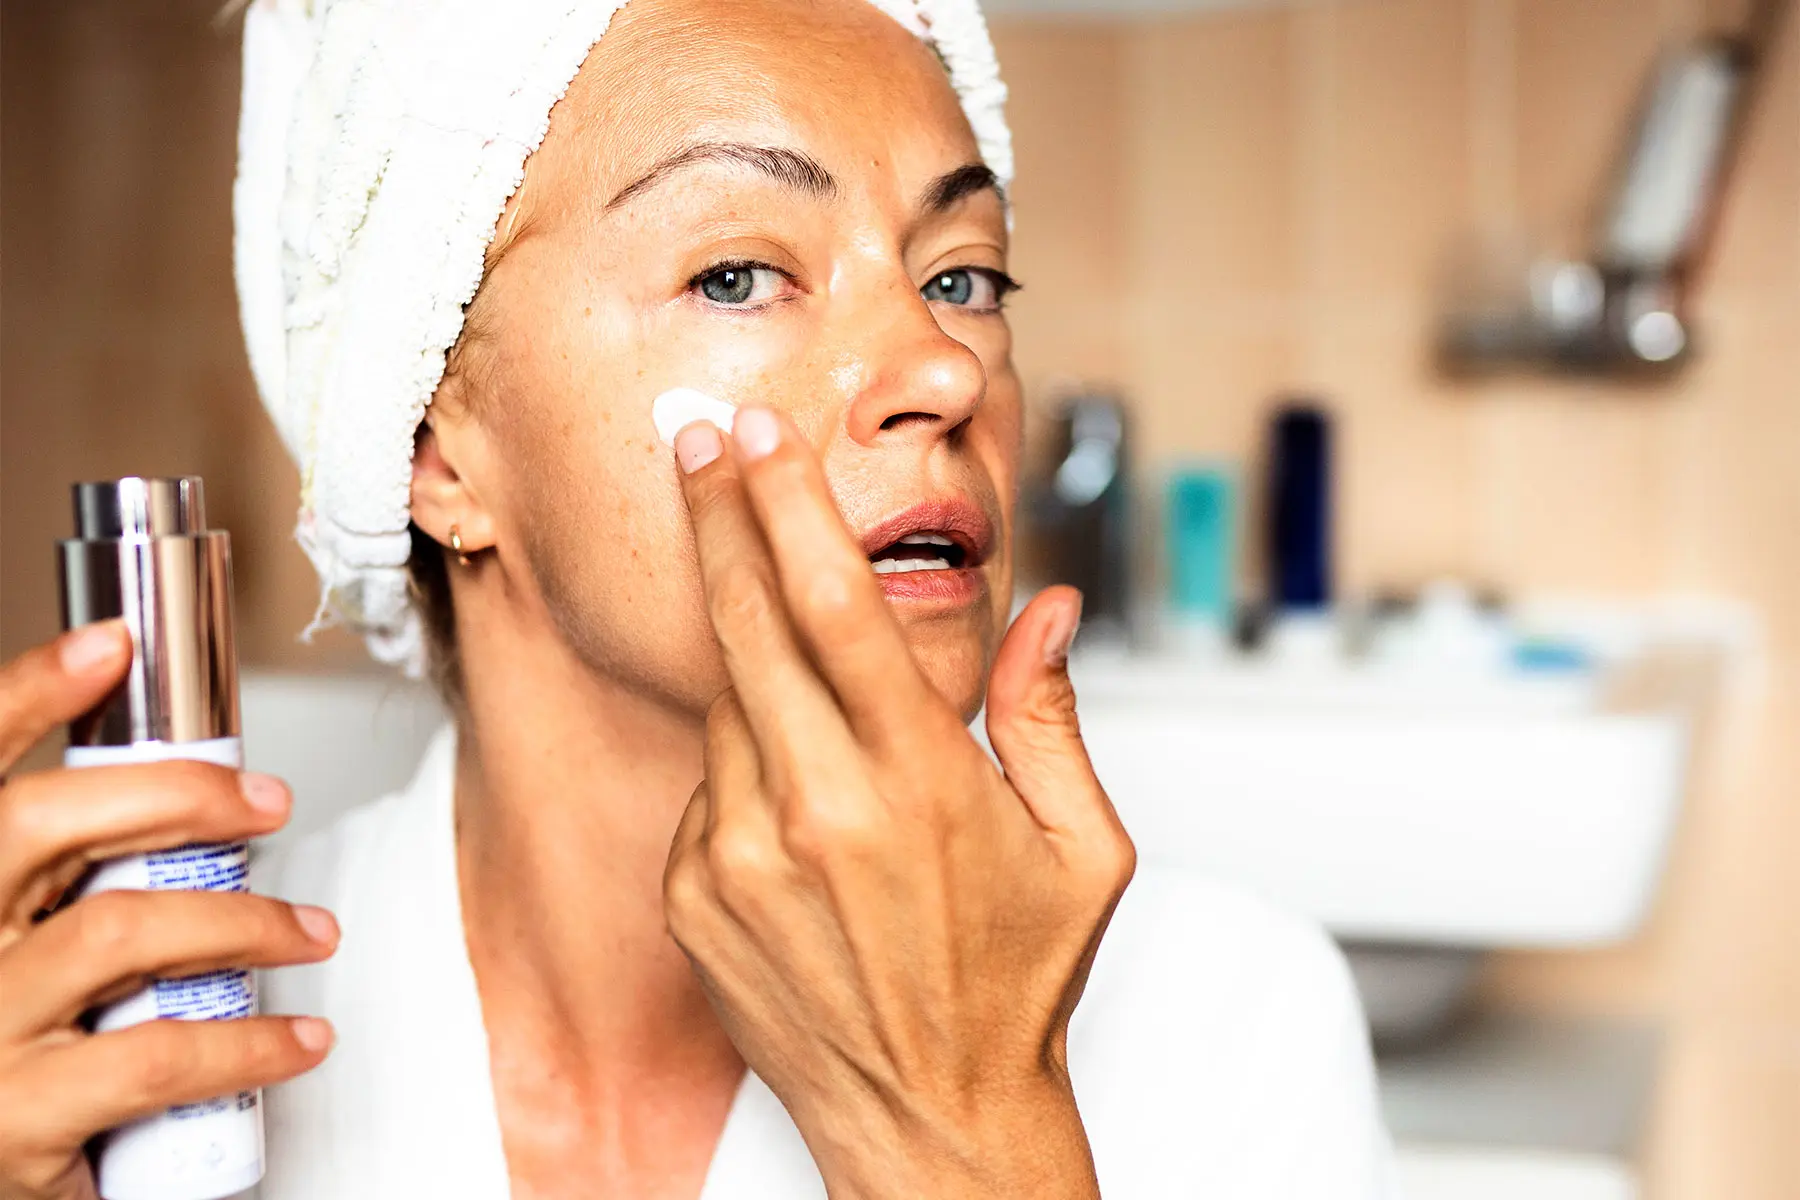 Blue-eyed woman with towel turban and bathrobe holding skin cream in one hand, while applying cream to her face. AW557